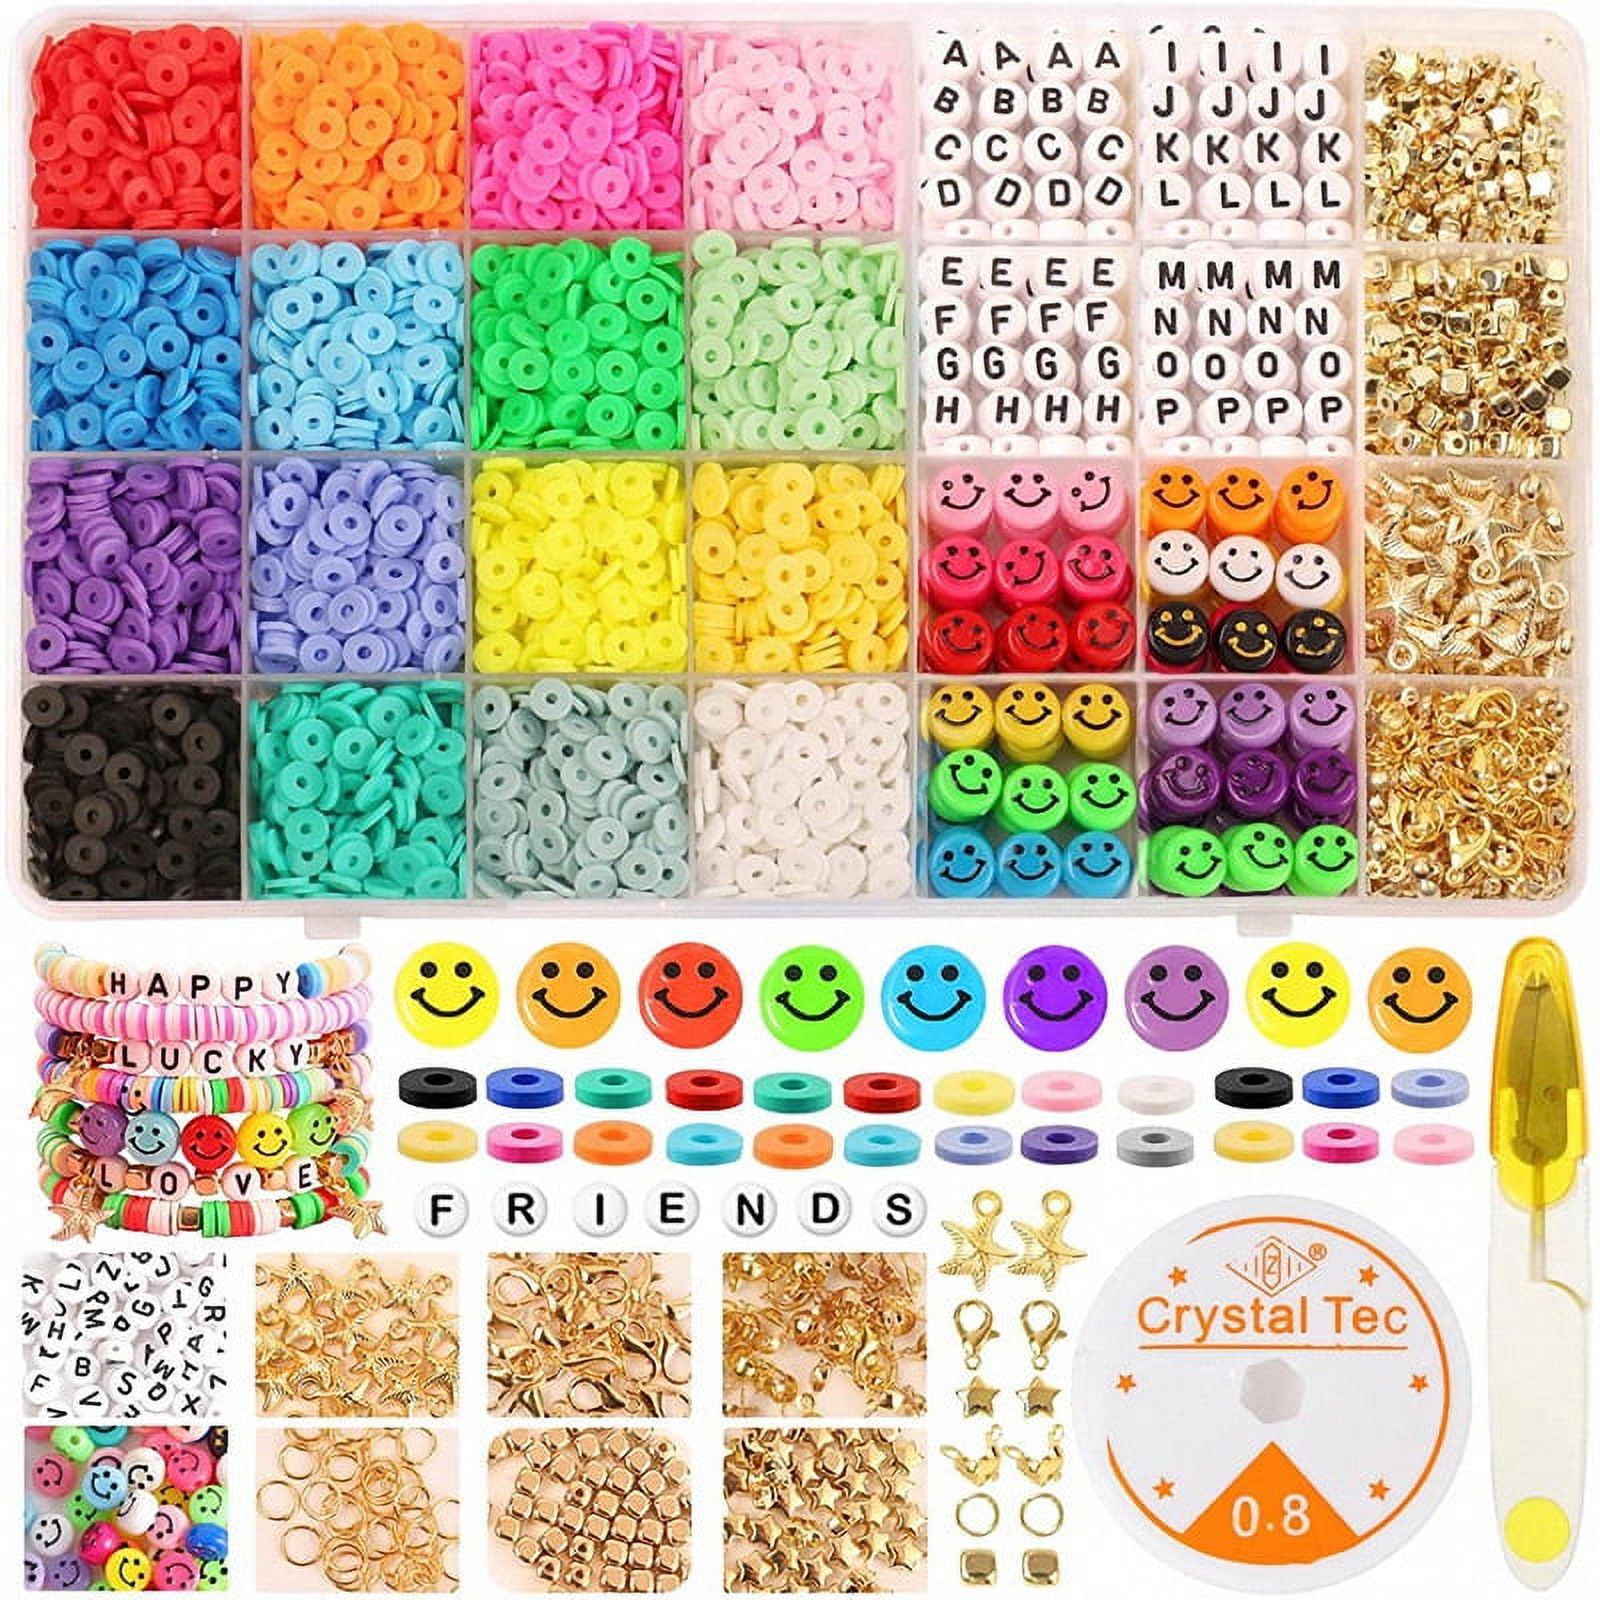 7636 pcs Clay Beads Bracelet Making Kit- Pearl Beads & Letter Beads for  Jewelry Making-Jewellery Making Kit with Colourful Polymer Clay Beads Charm Bracelet  Beads & DIY Jewellery Making Supplies